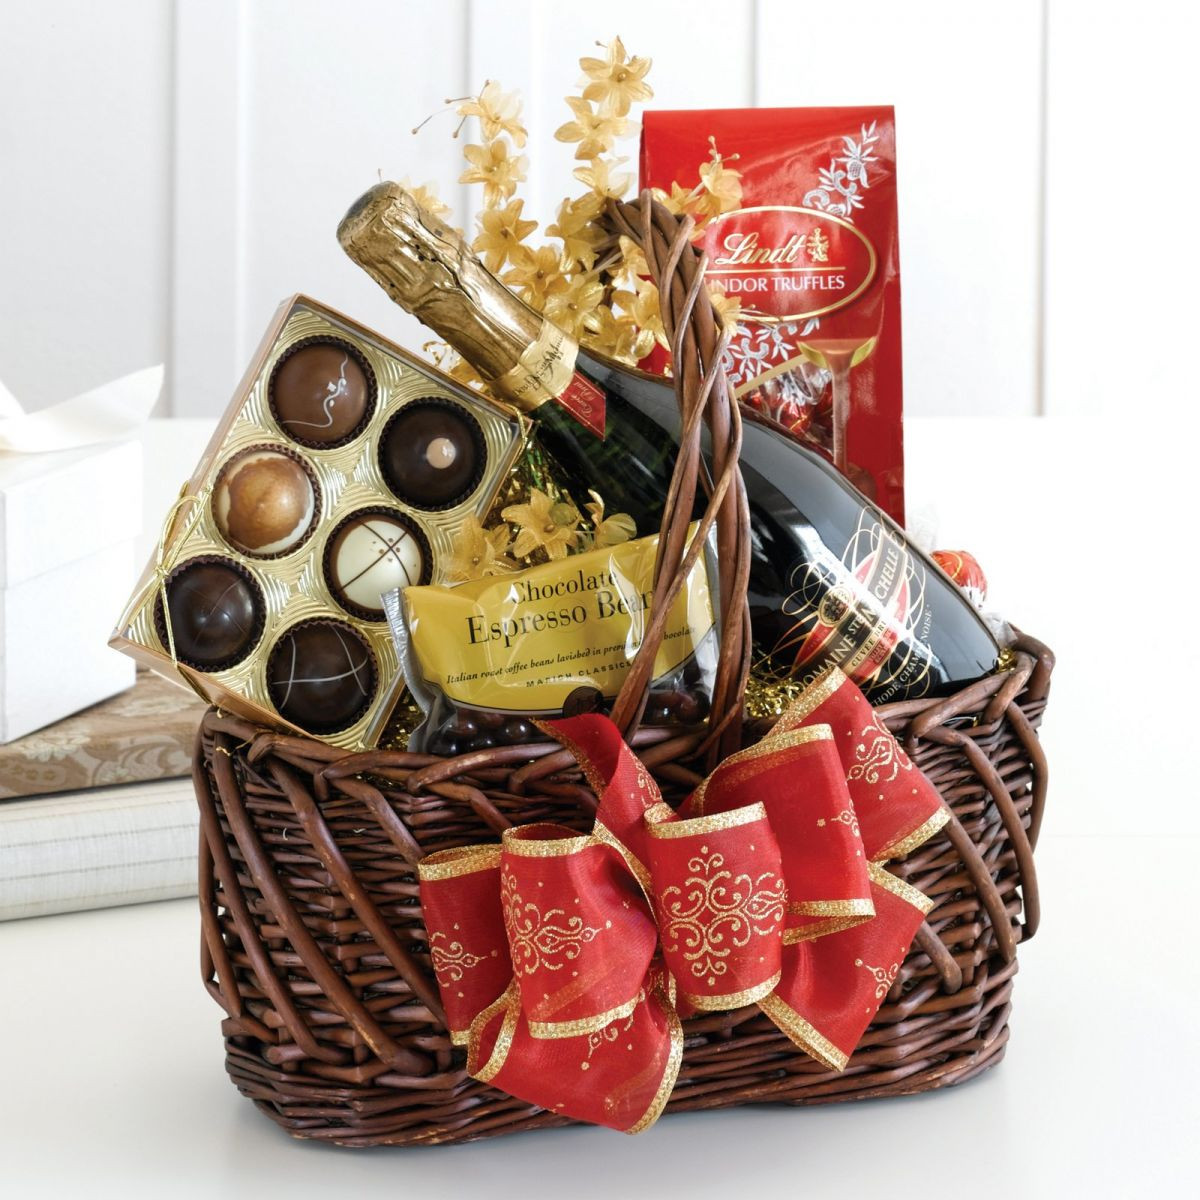 Christmas Chocolate Gift Ideas
 Collectibles And Gifts Chocolate Gift Basket Ideas